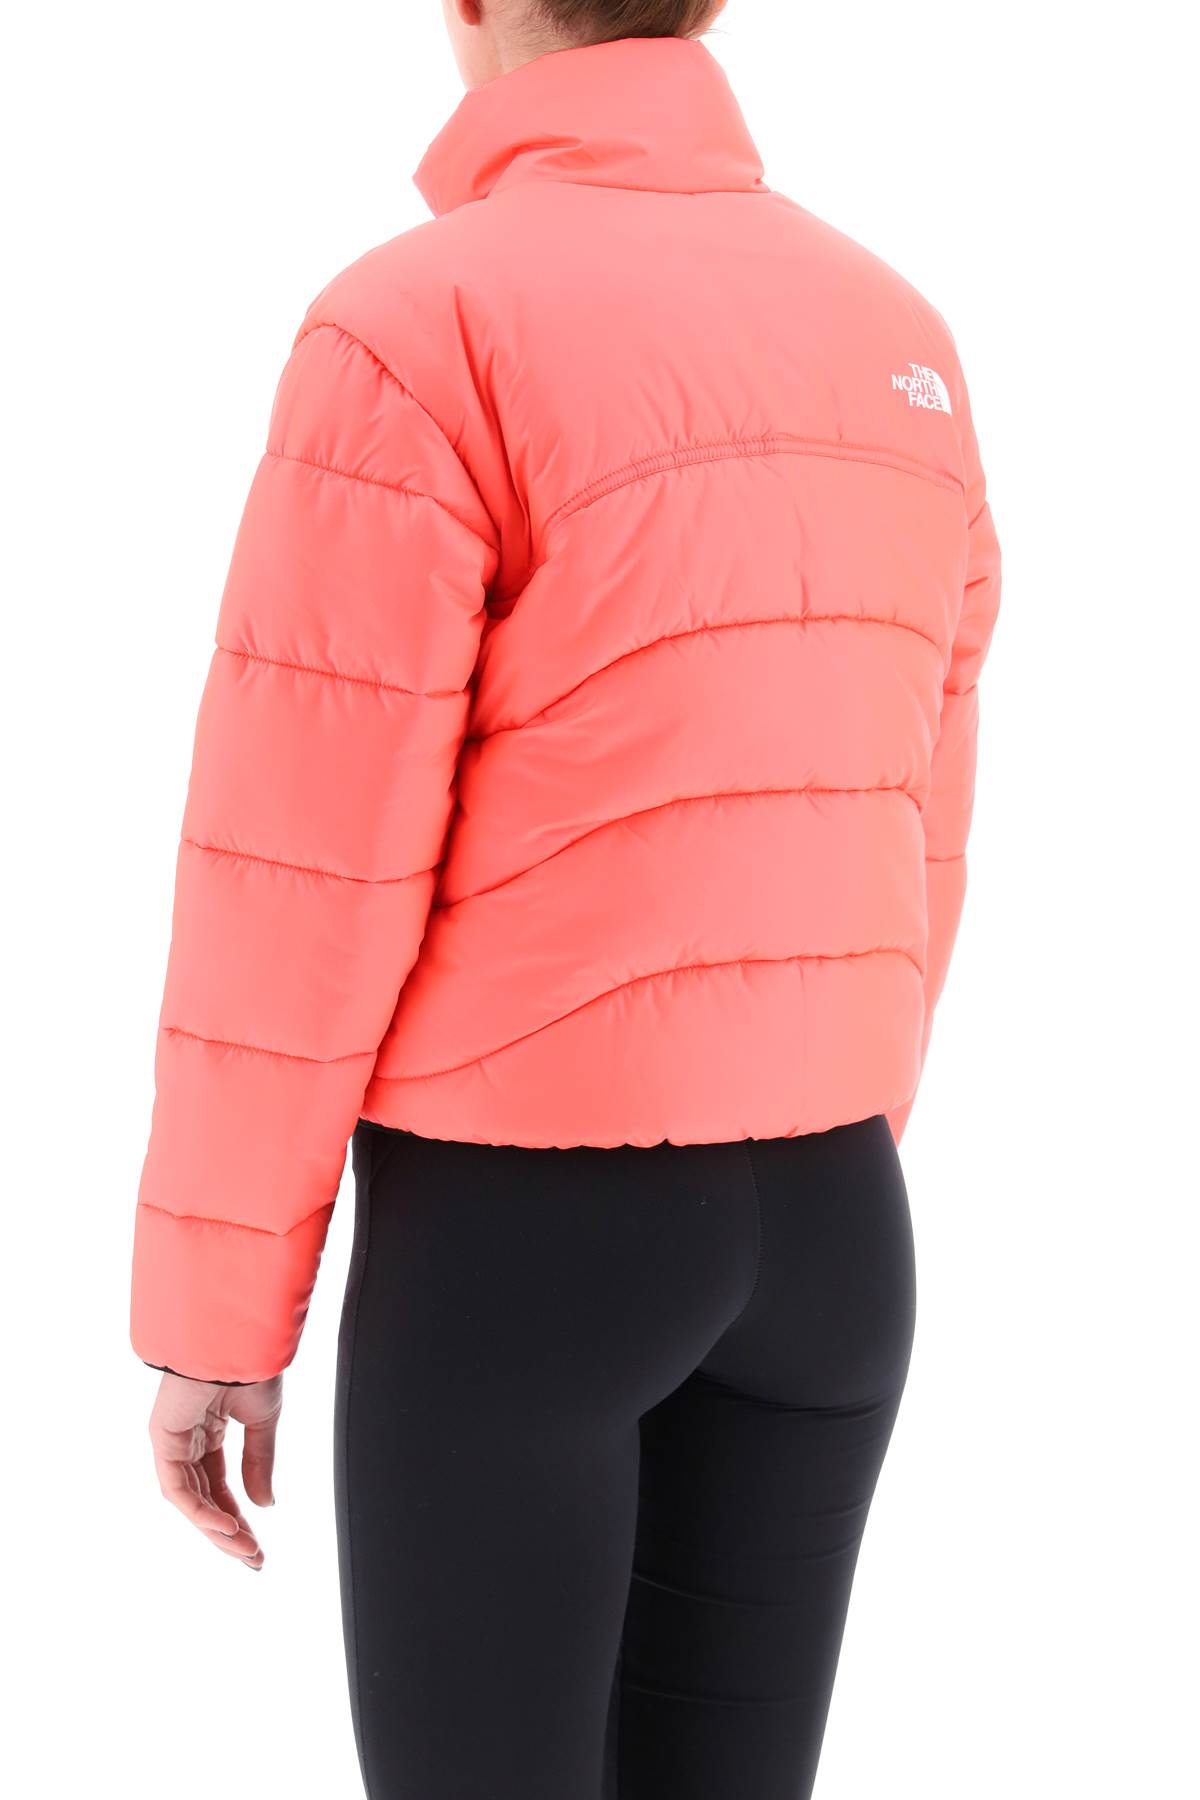 THE NORTH FACE ELEMENTS SHORT JACKET 